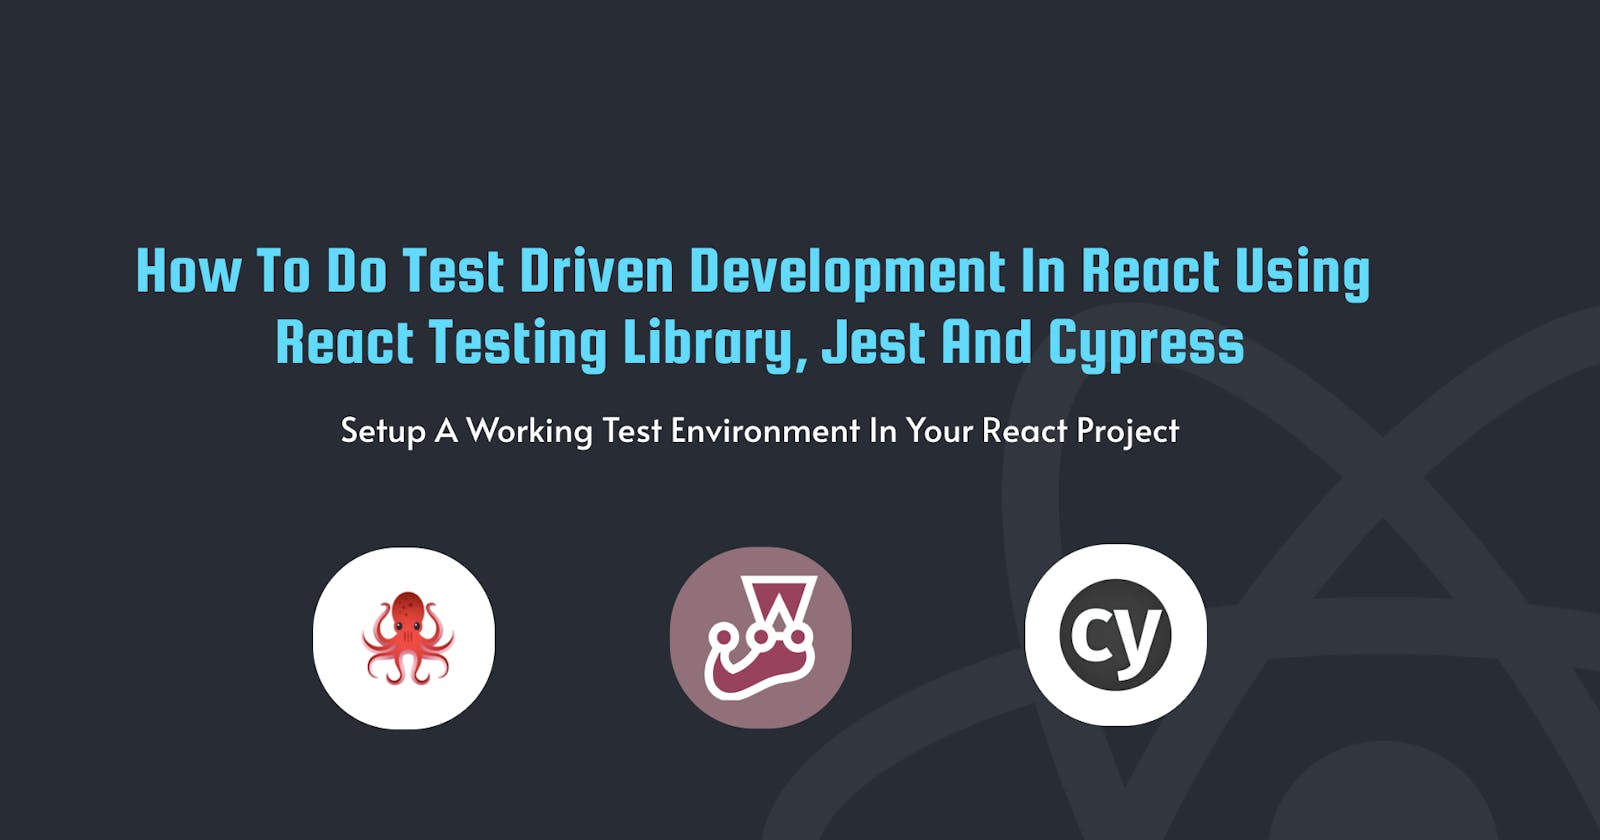 How to do Test Driven Development in React using React Testing Library, Jest and Cypress